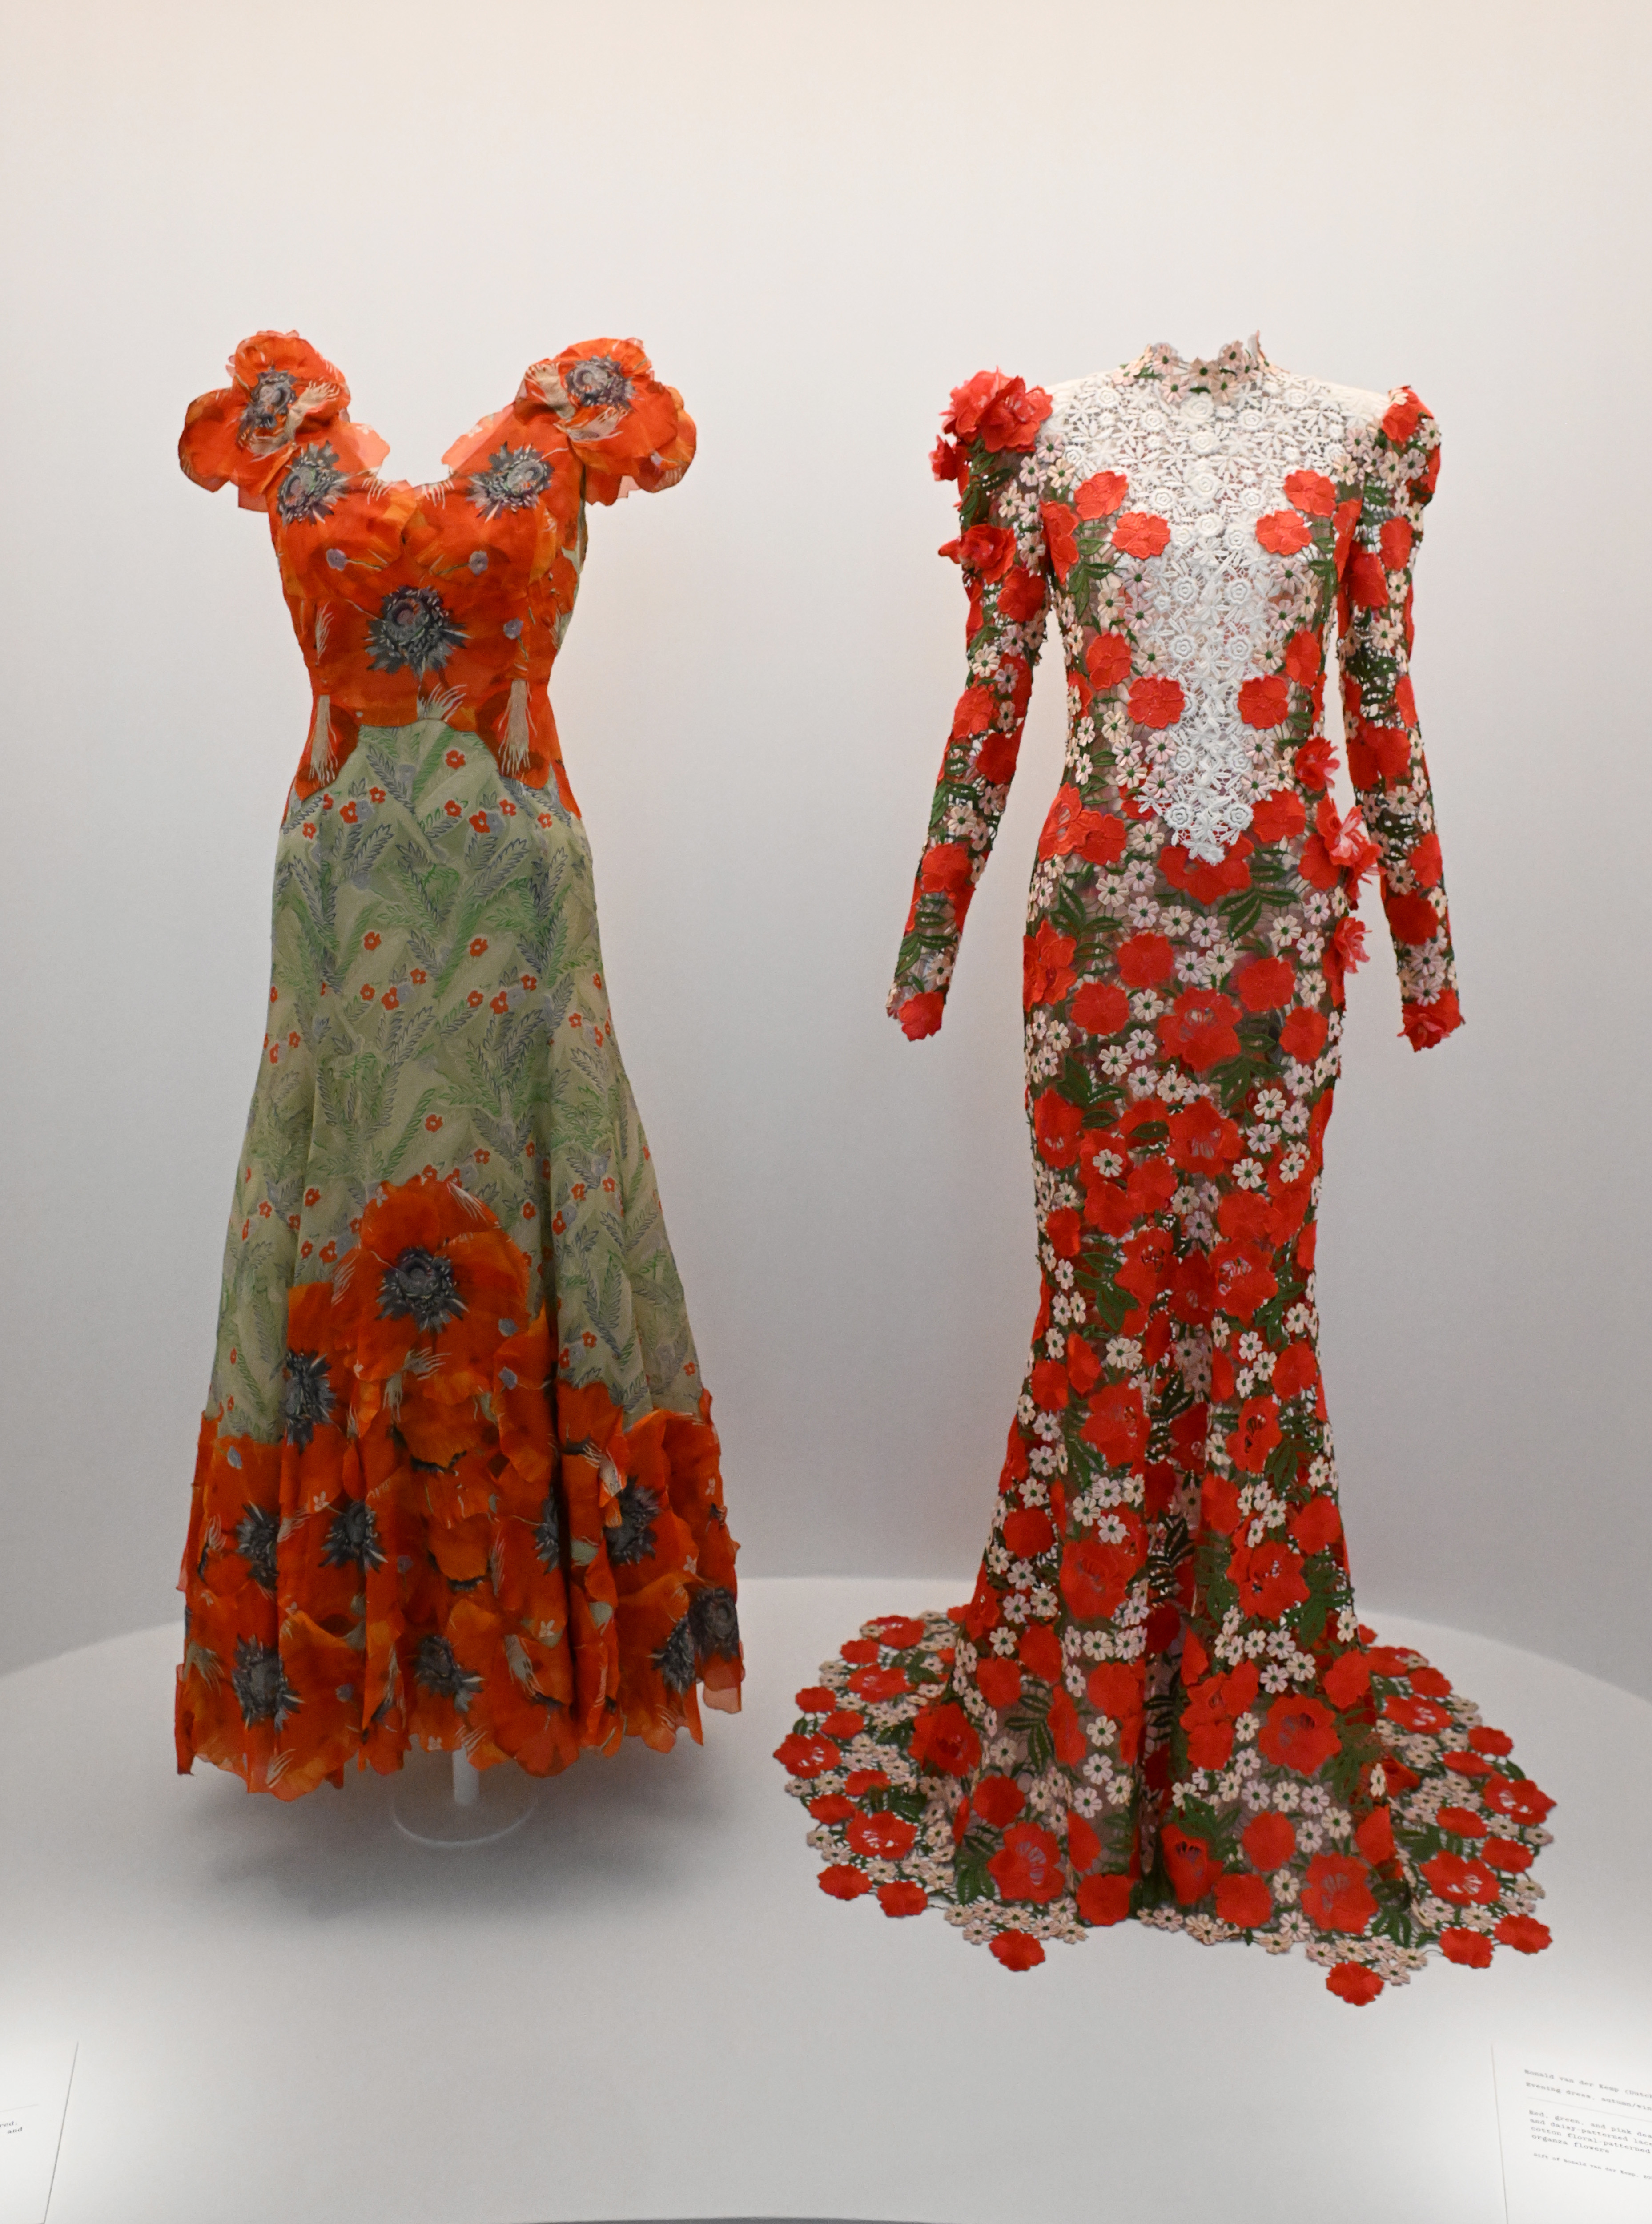 Two floral gowns with 3D flowers on display, one featuring a high neckline and the other with short sleeves